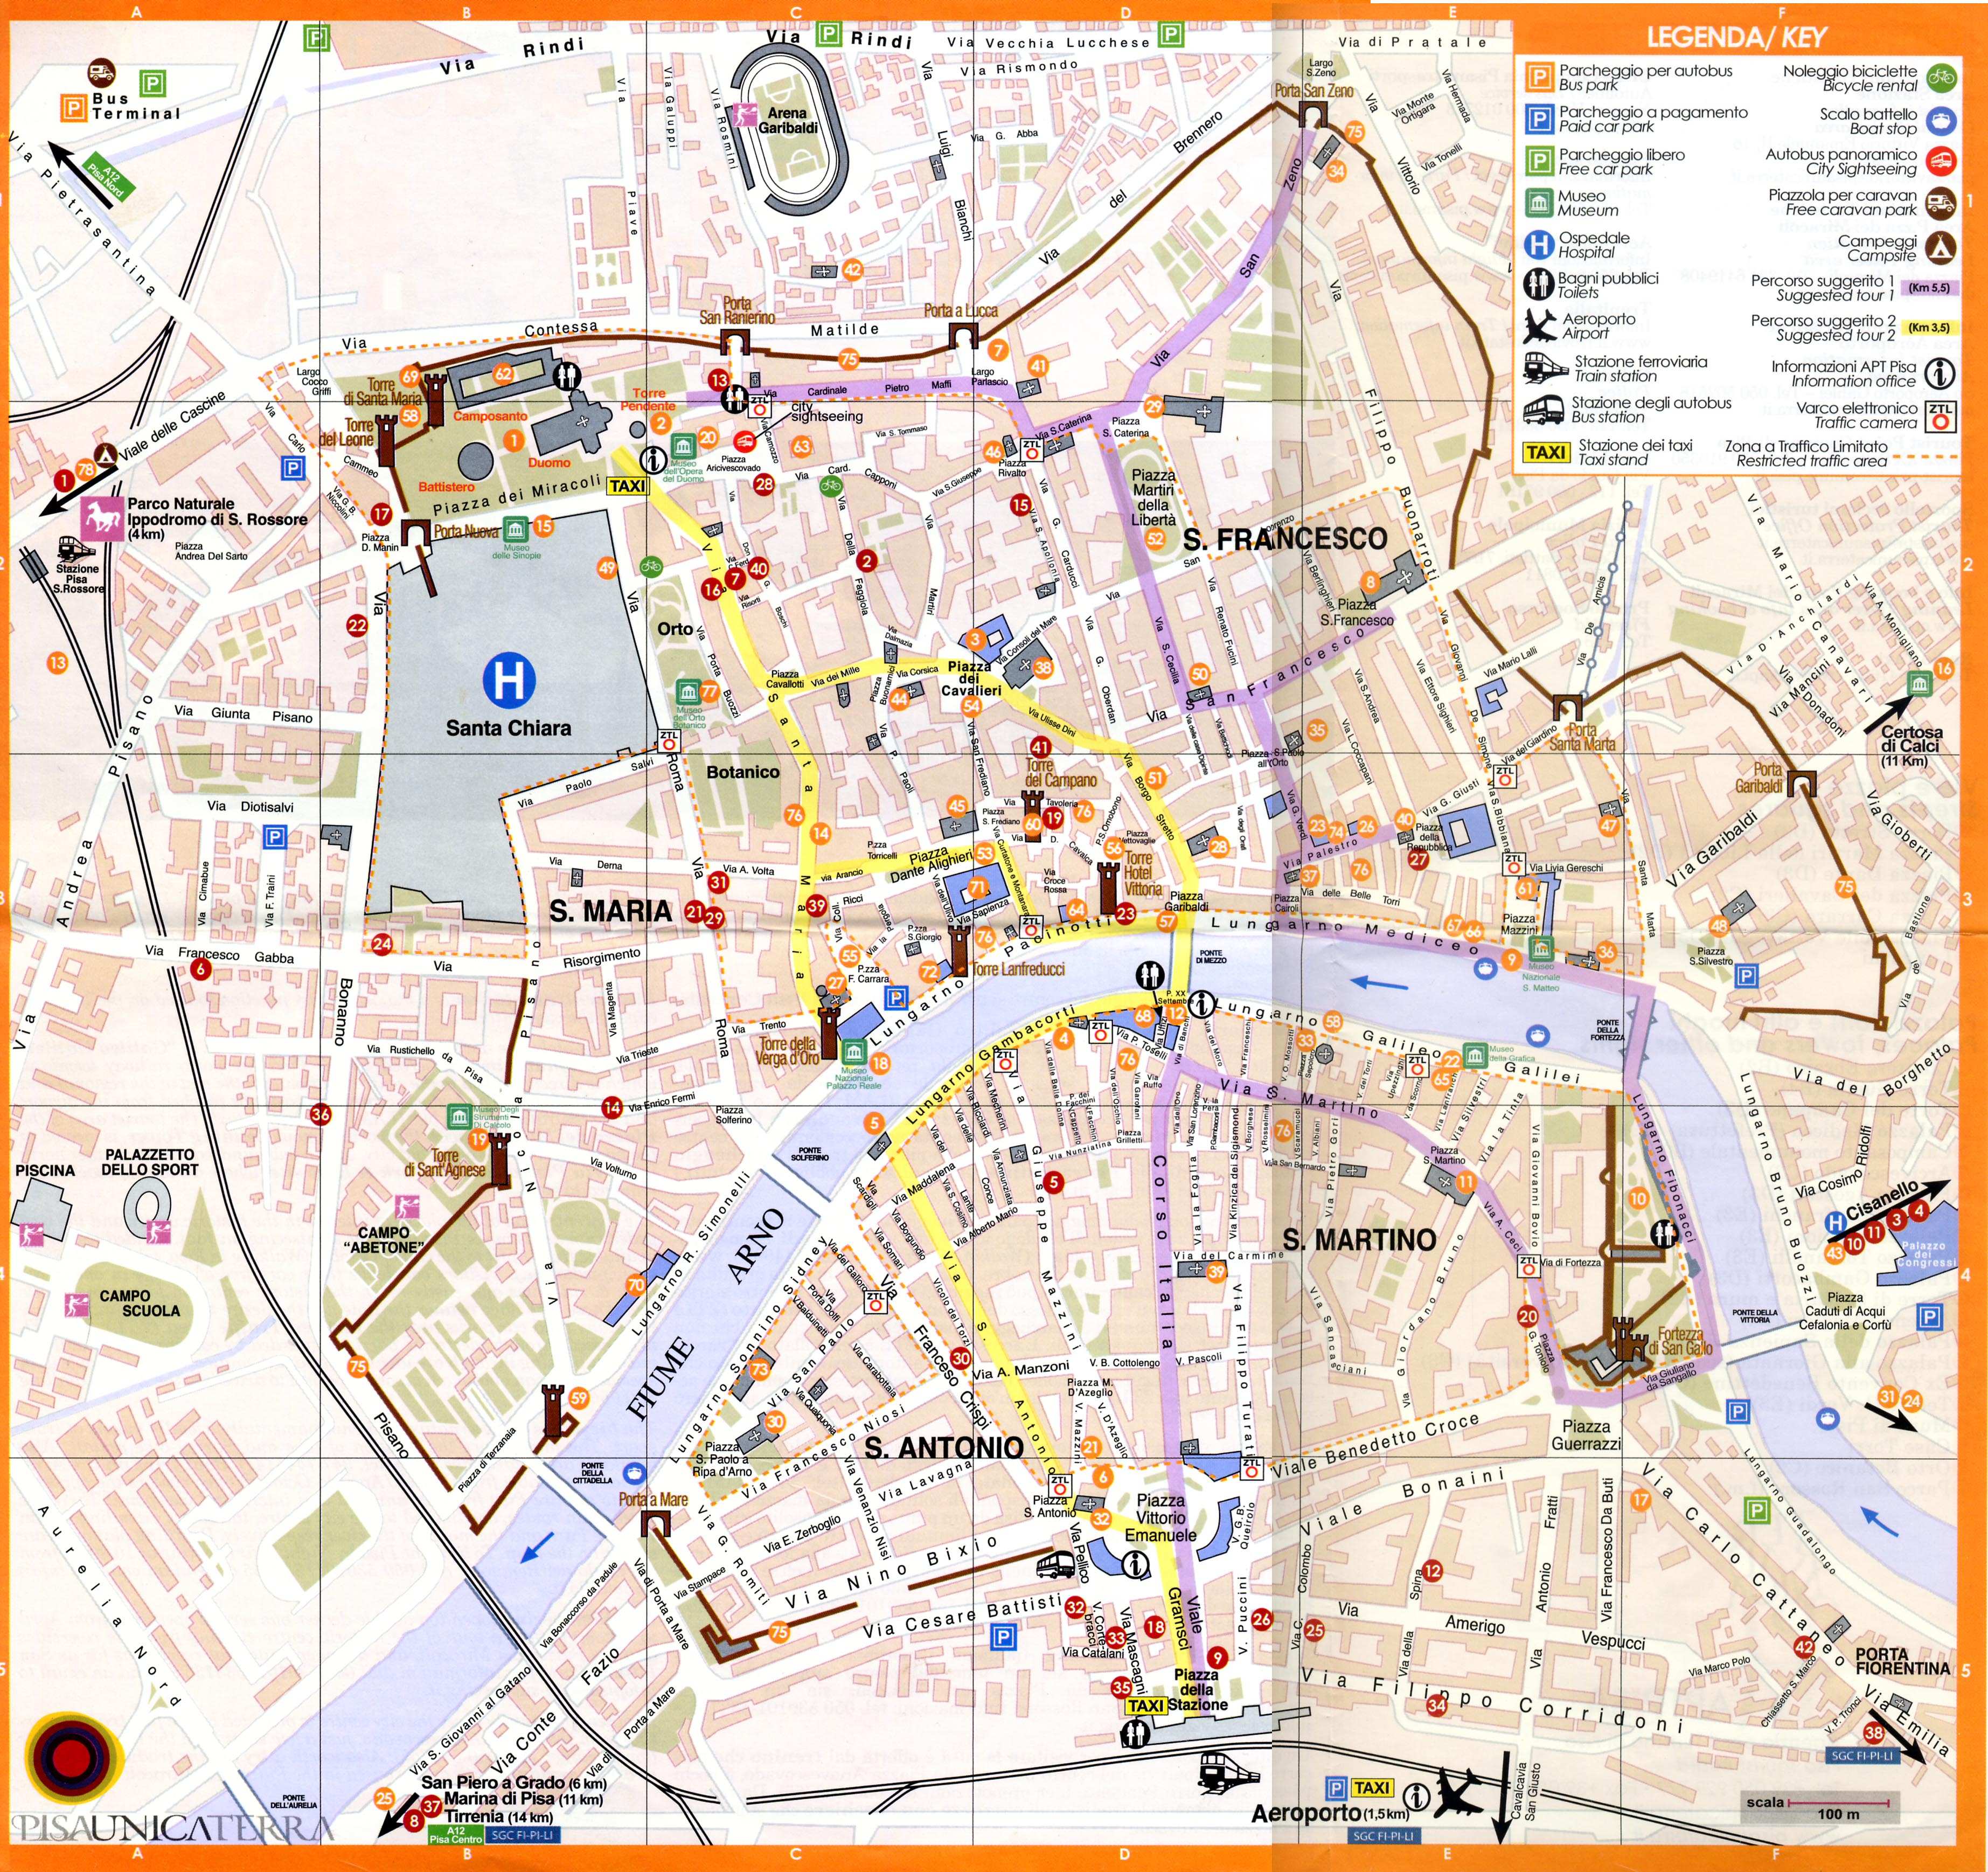 Large Pisa Maps For Free Download And Print High Resolution And Detailed Maps